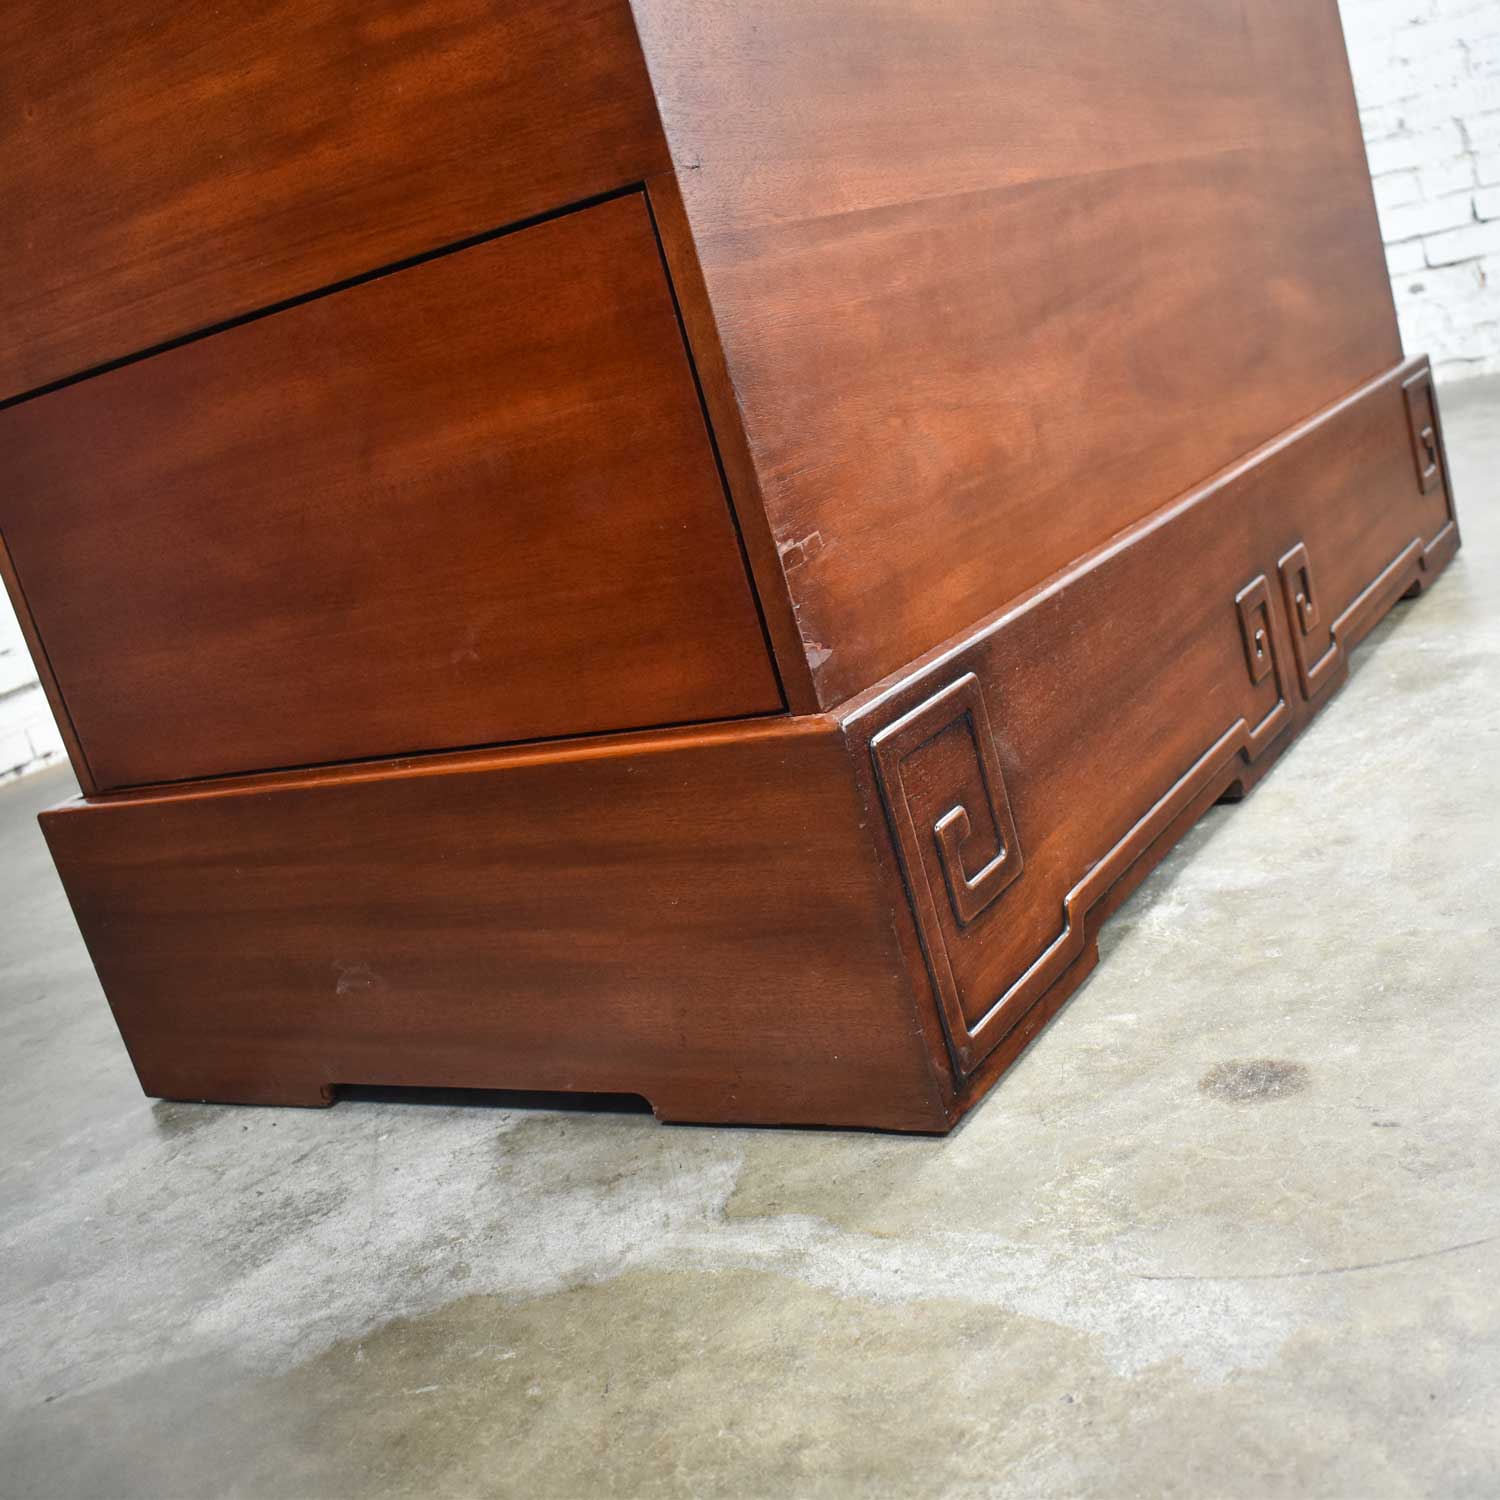 Art Deco Style Mahogany Entry Desk or Bar by IMA S.A. Bogota, Colombia